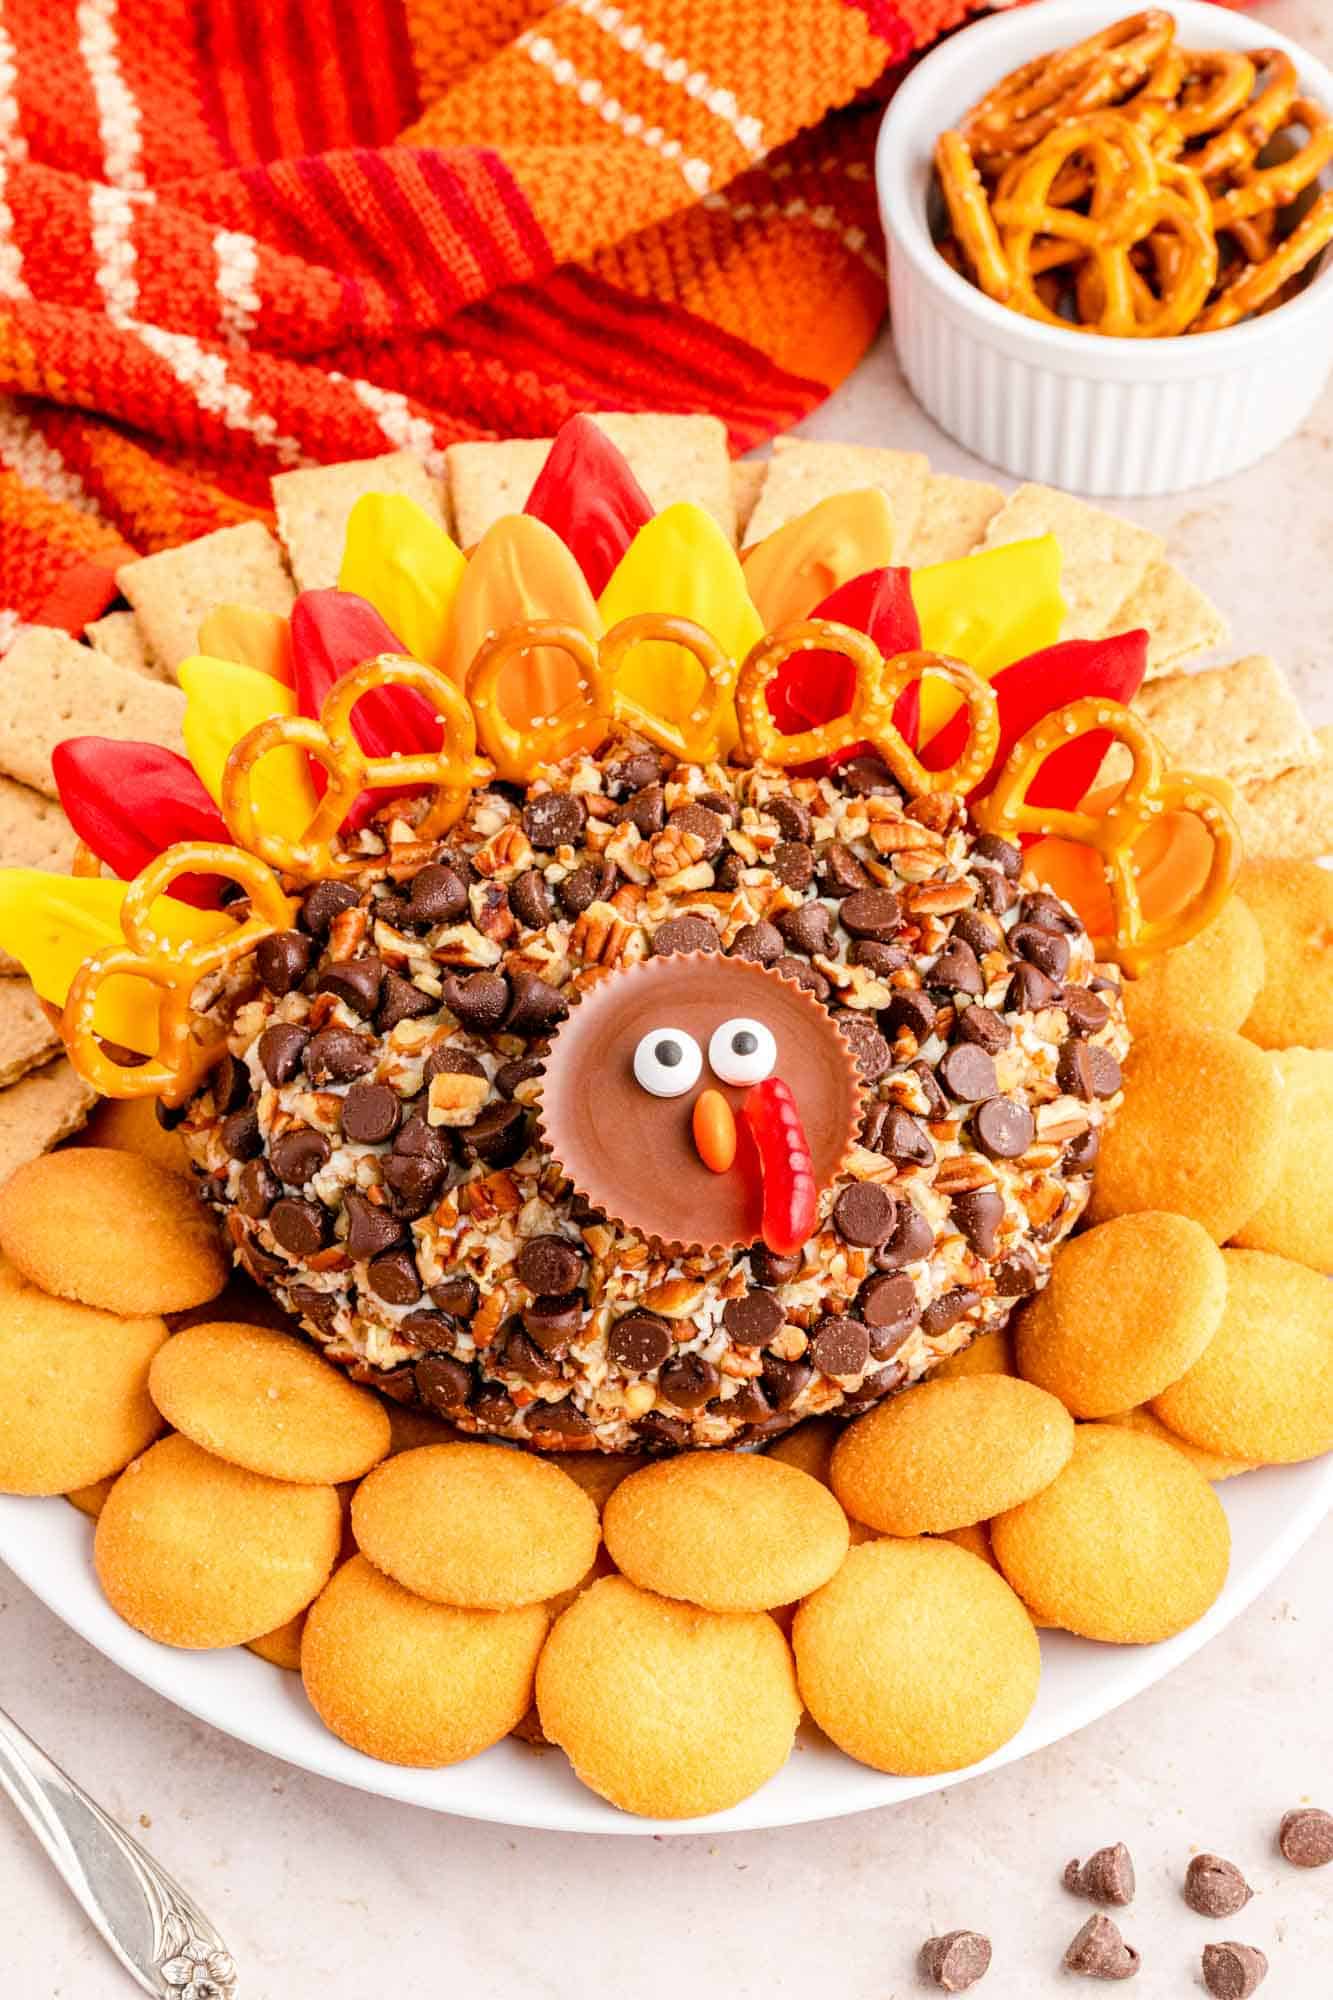 a dessert cheese ball shaped like a turkey with preze and candy melt feathers and a face made from a reeses cup